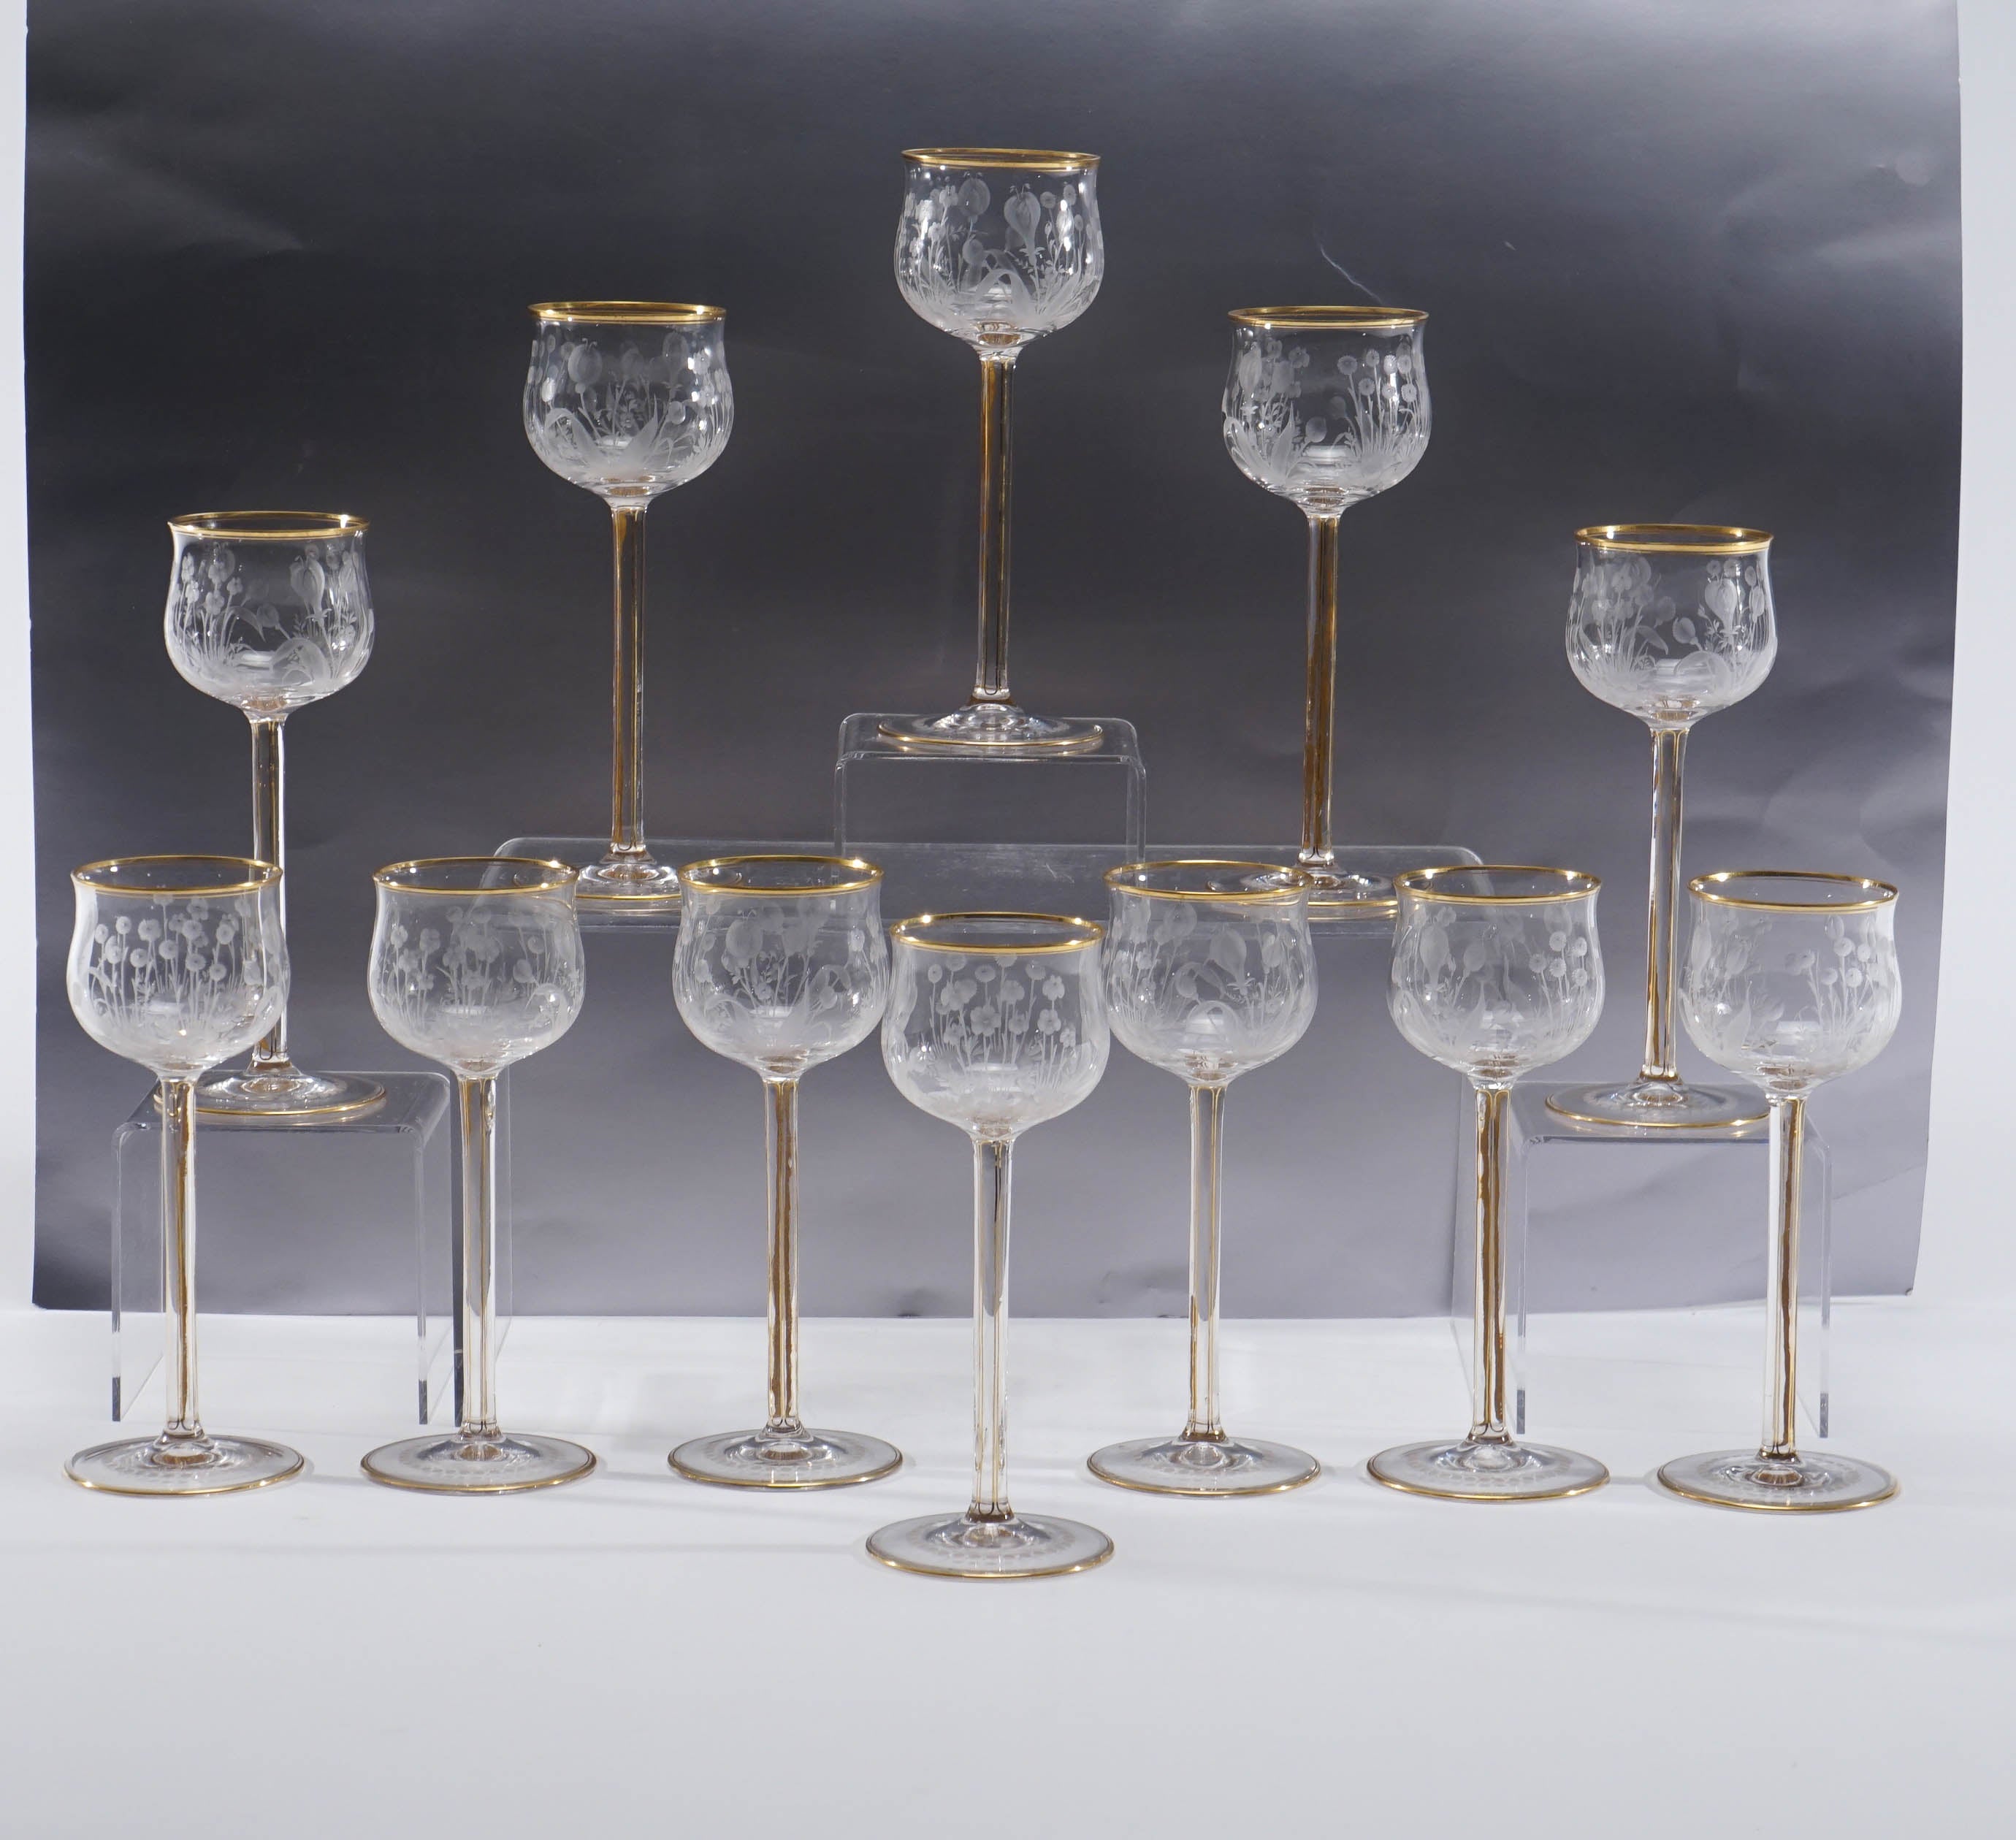 12 Handblown Crystal Mousseline Goblets Hock Wines with Intaglio Cut Decoration